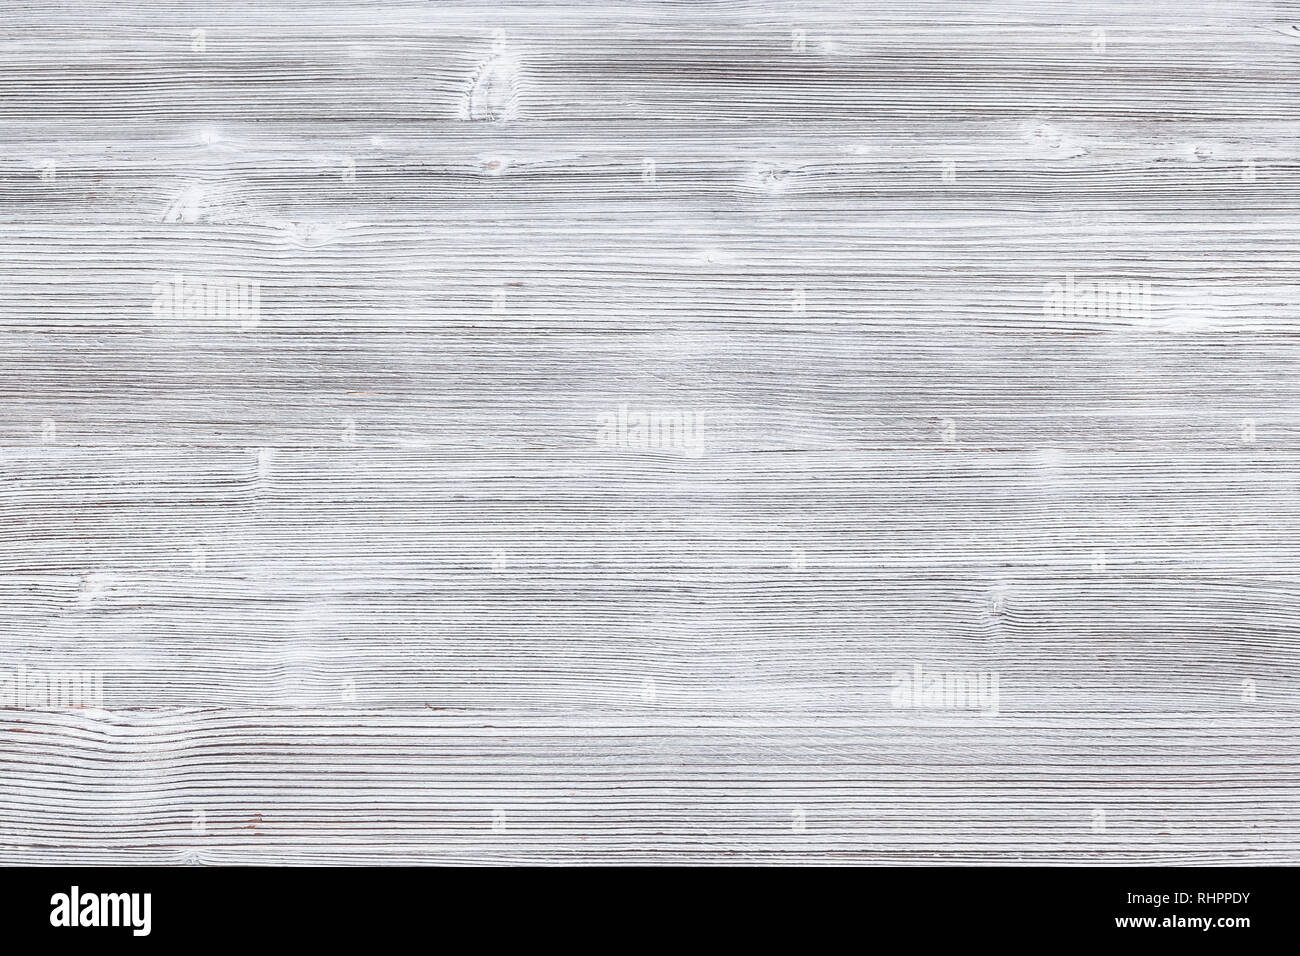 background from natural wooden planks painted in gray color Stock Photo